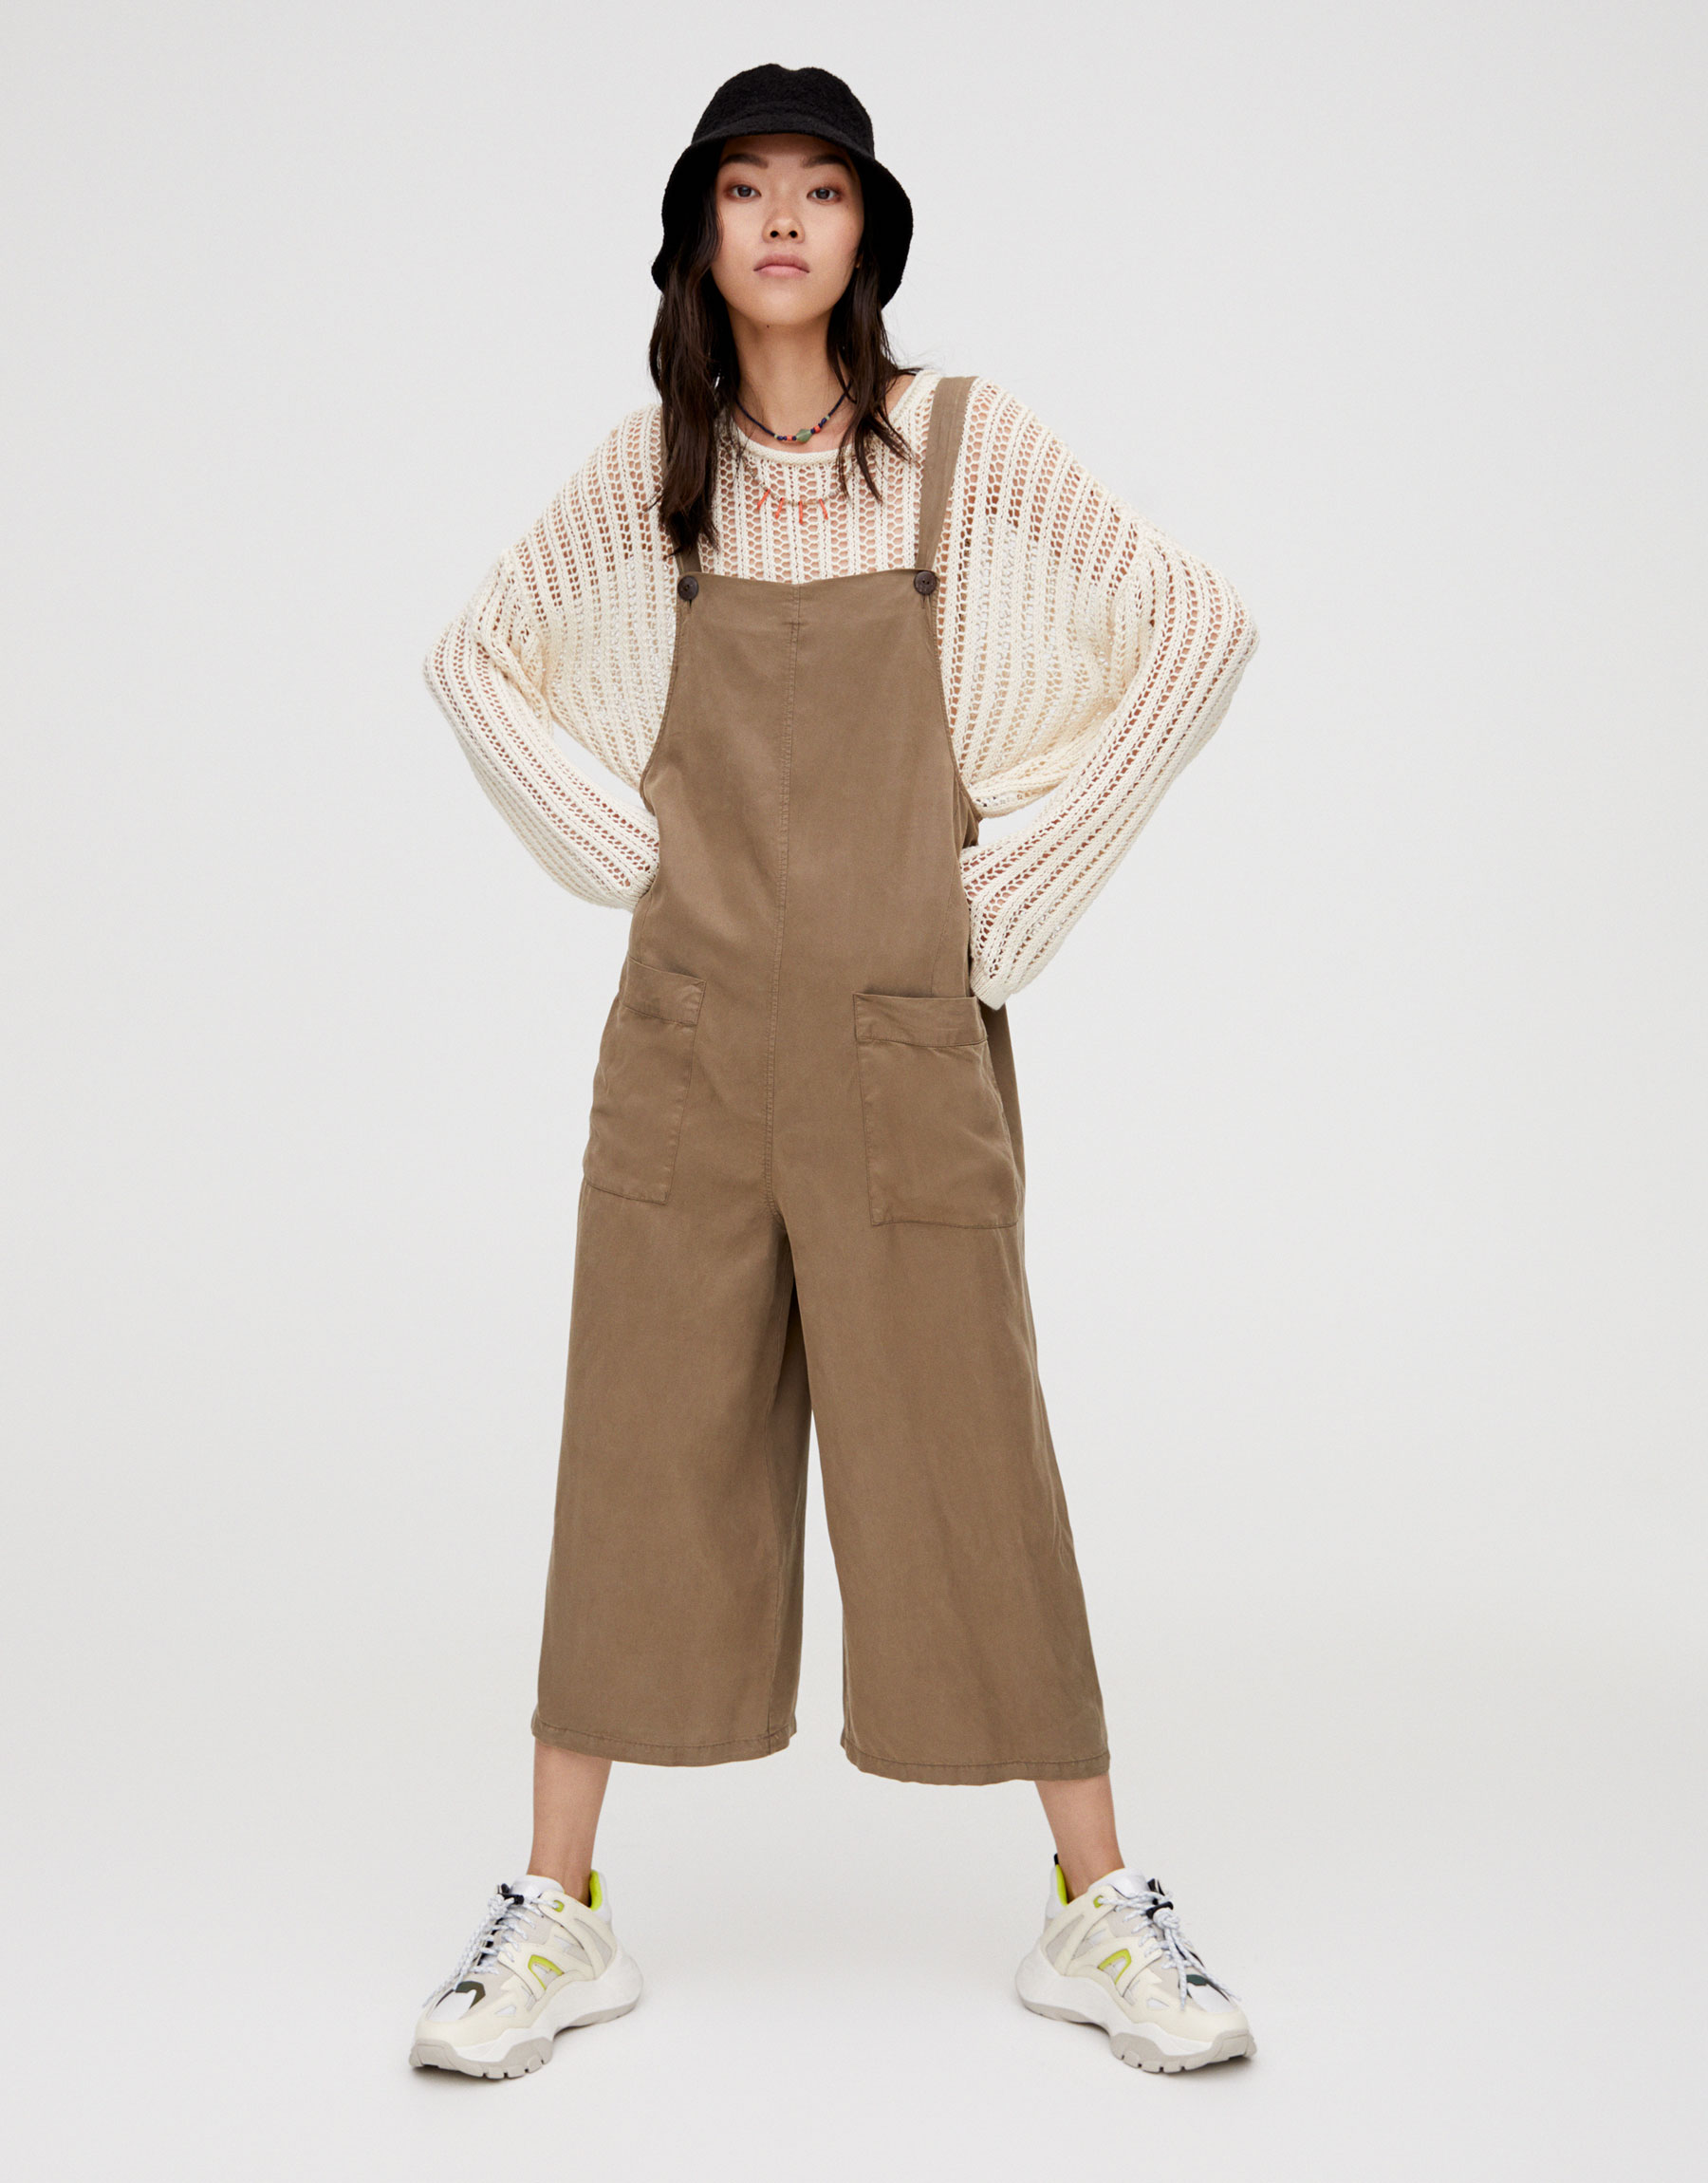 pull and bear overall dress